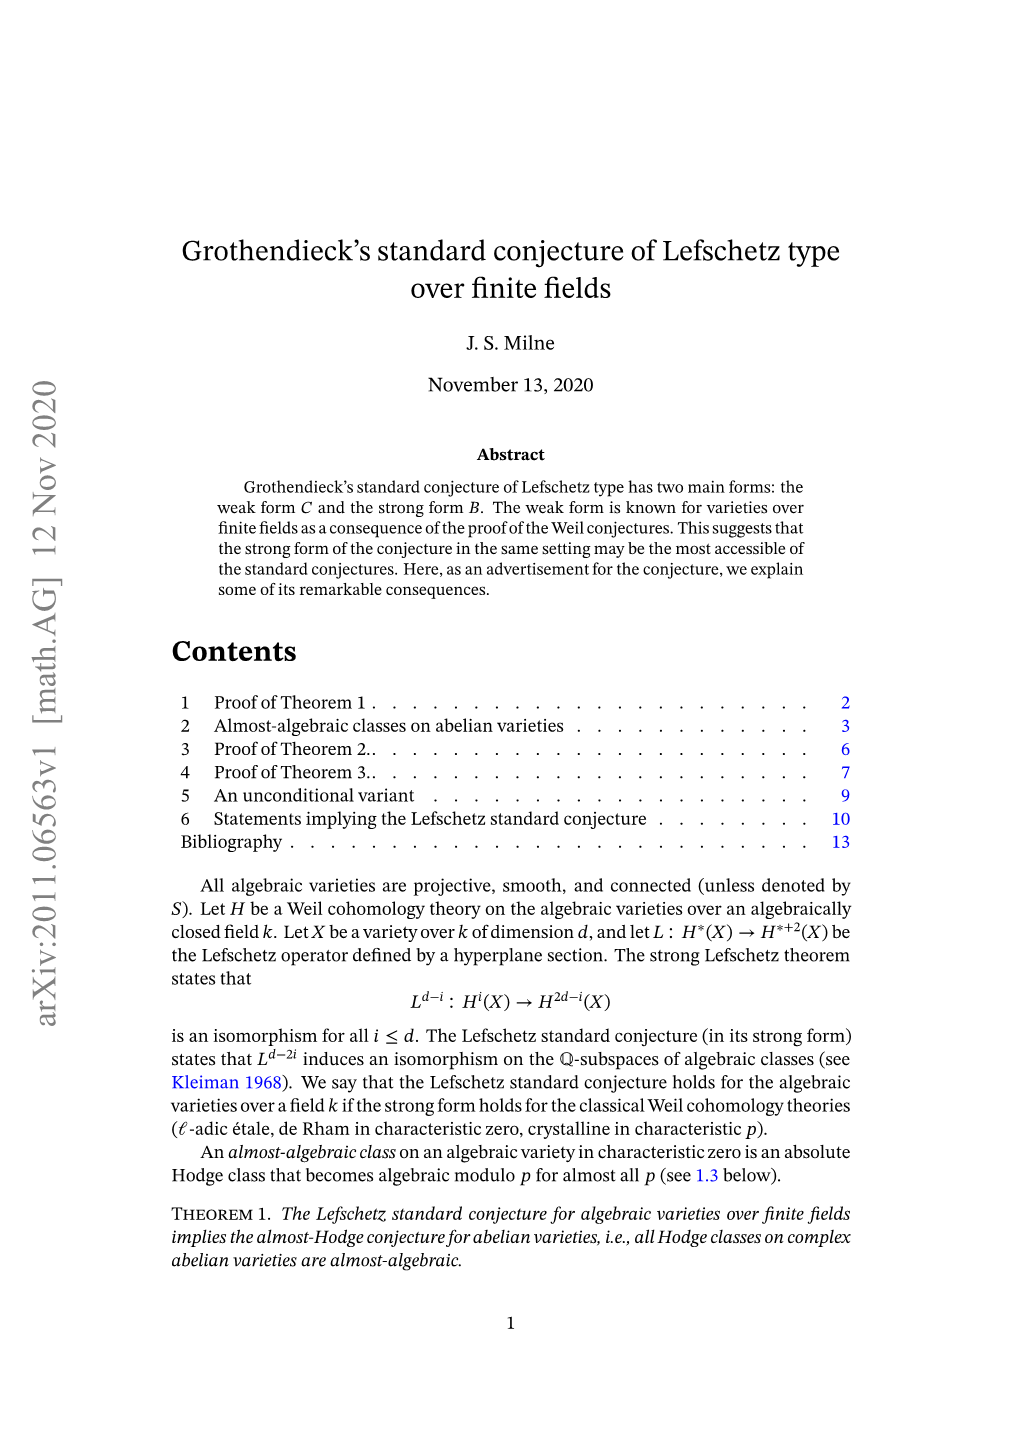 Consequences of the Lefschetz Standard Conjecture